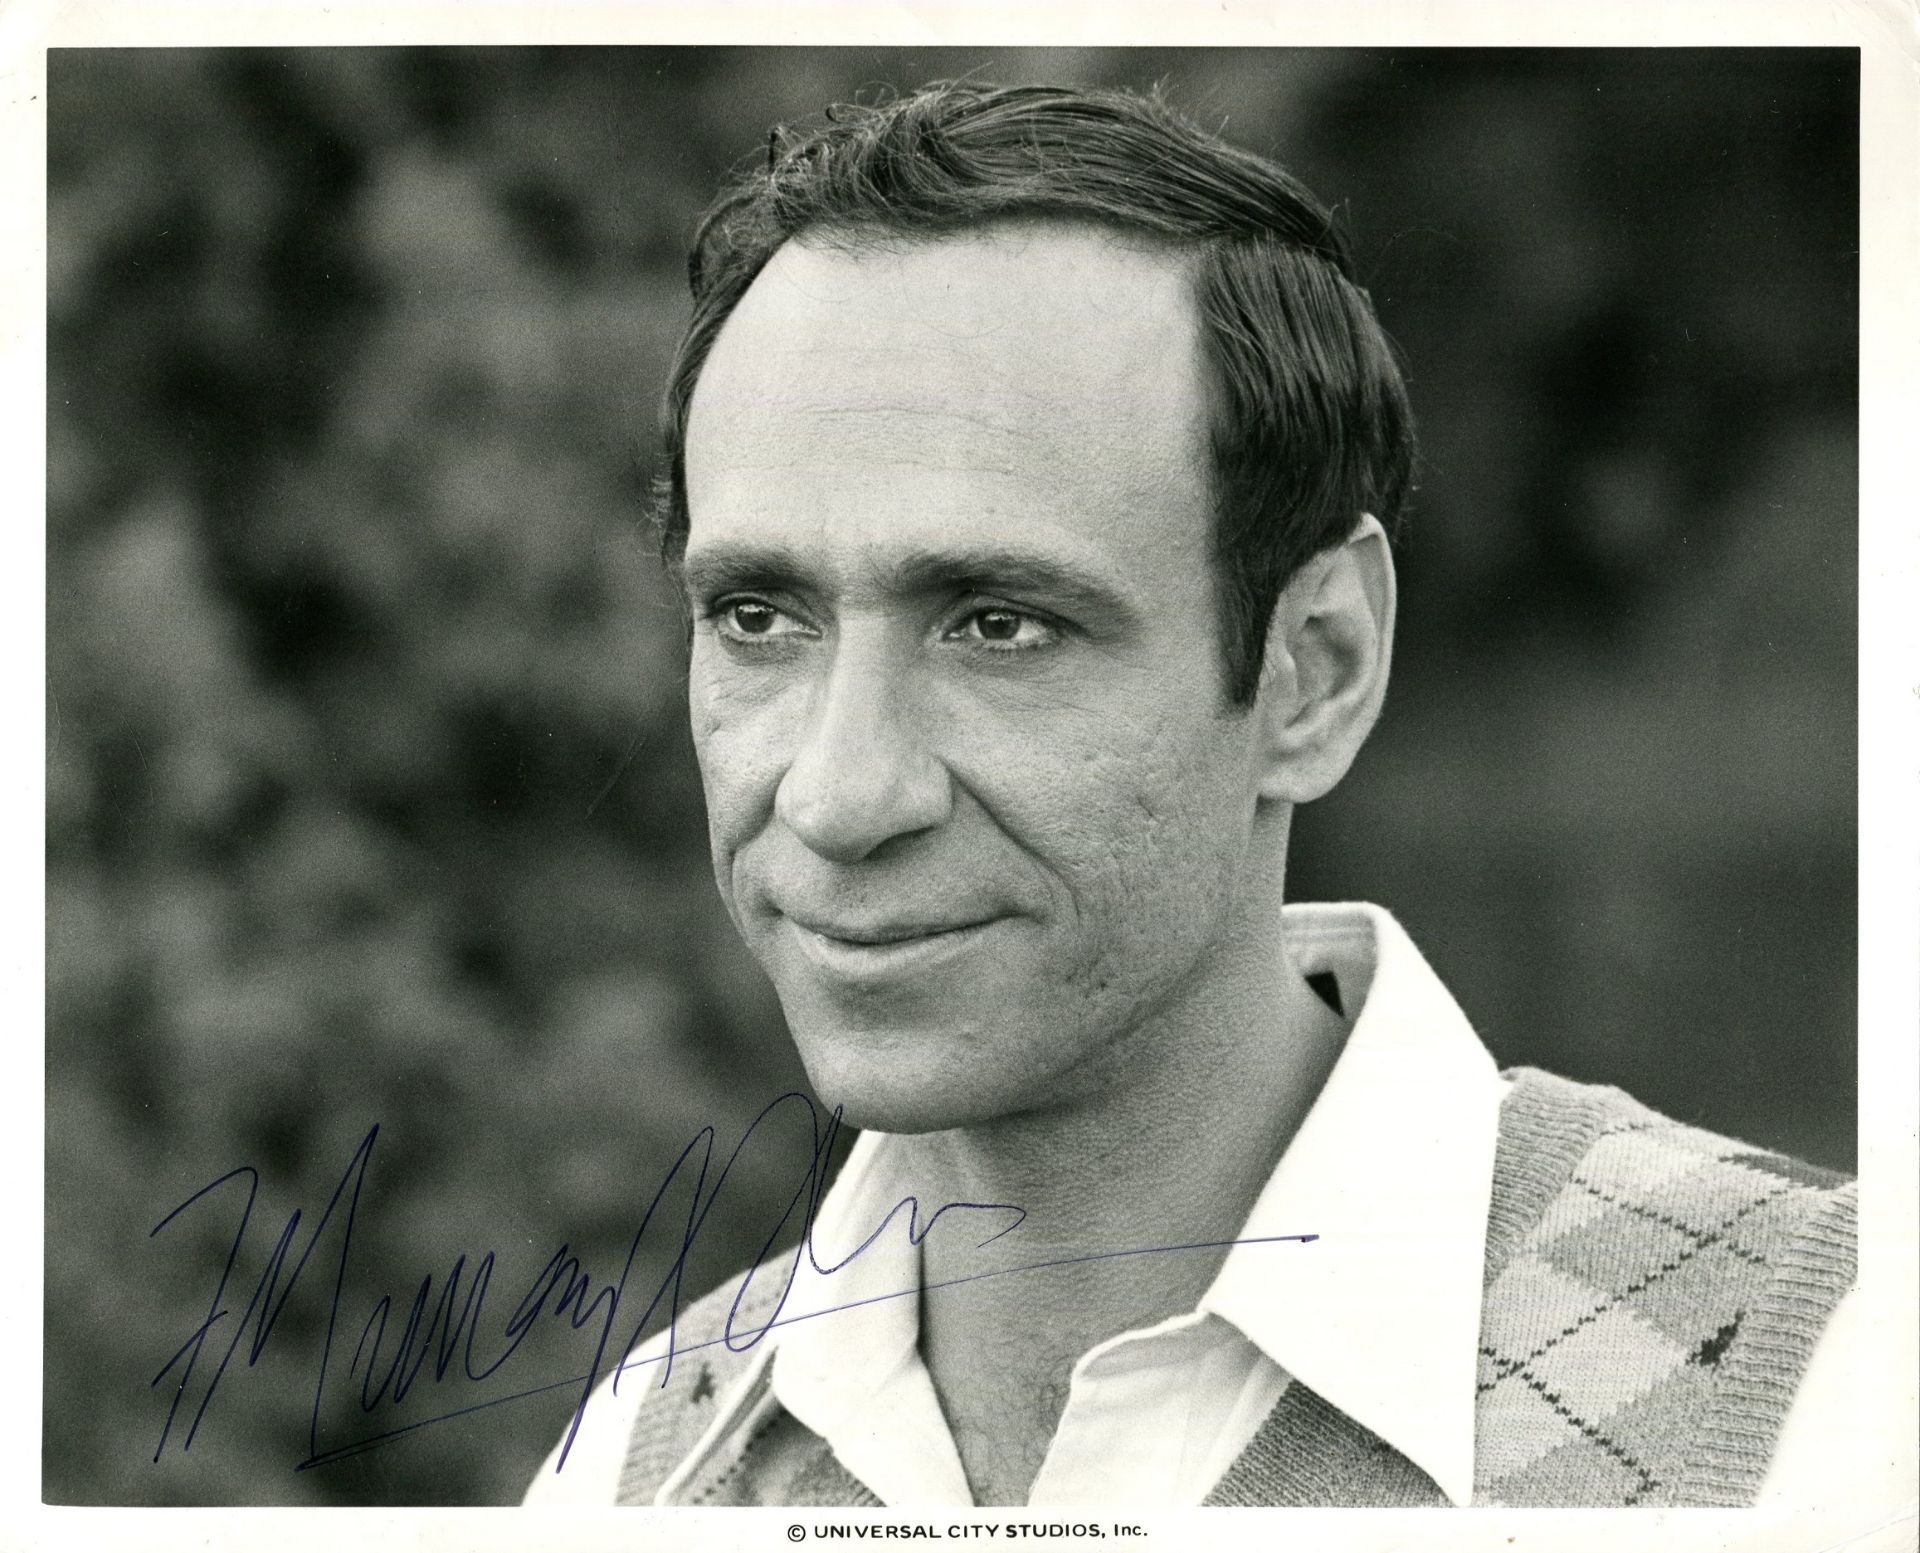 ABRAHAM F. MURRAY: (1939- ) American actor, Academy Award winner. Signed 10 x 8 photograph of